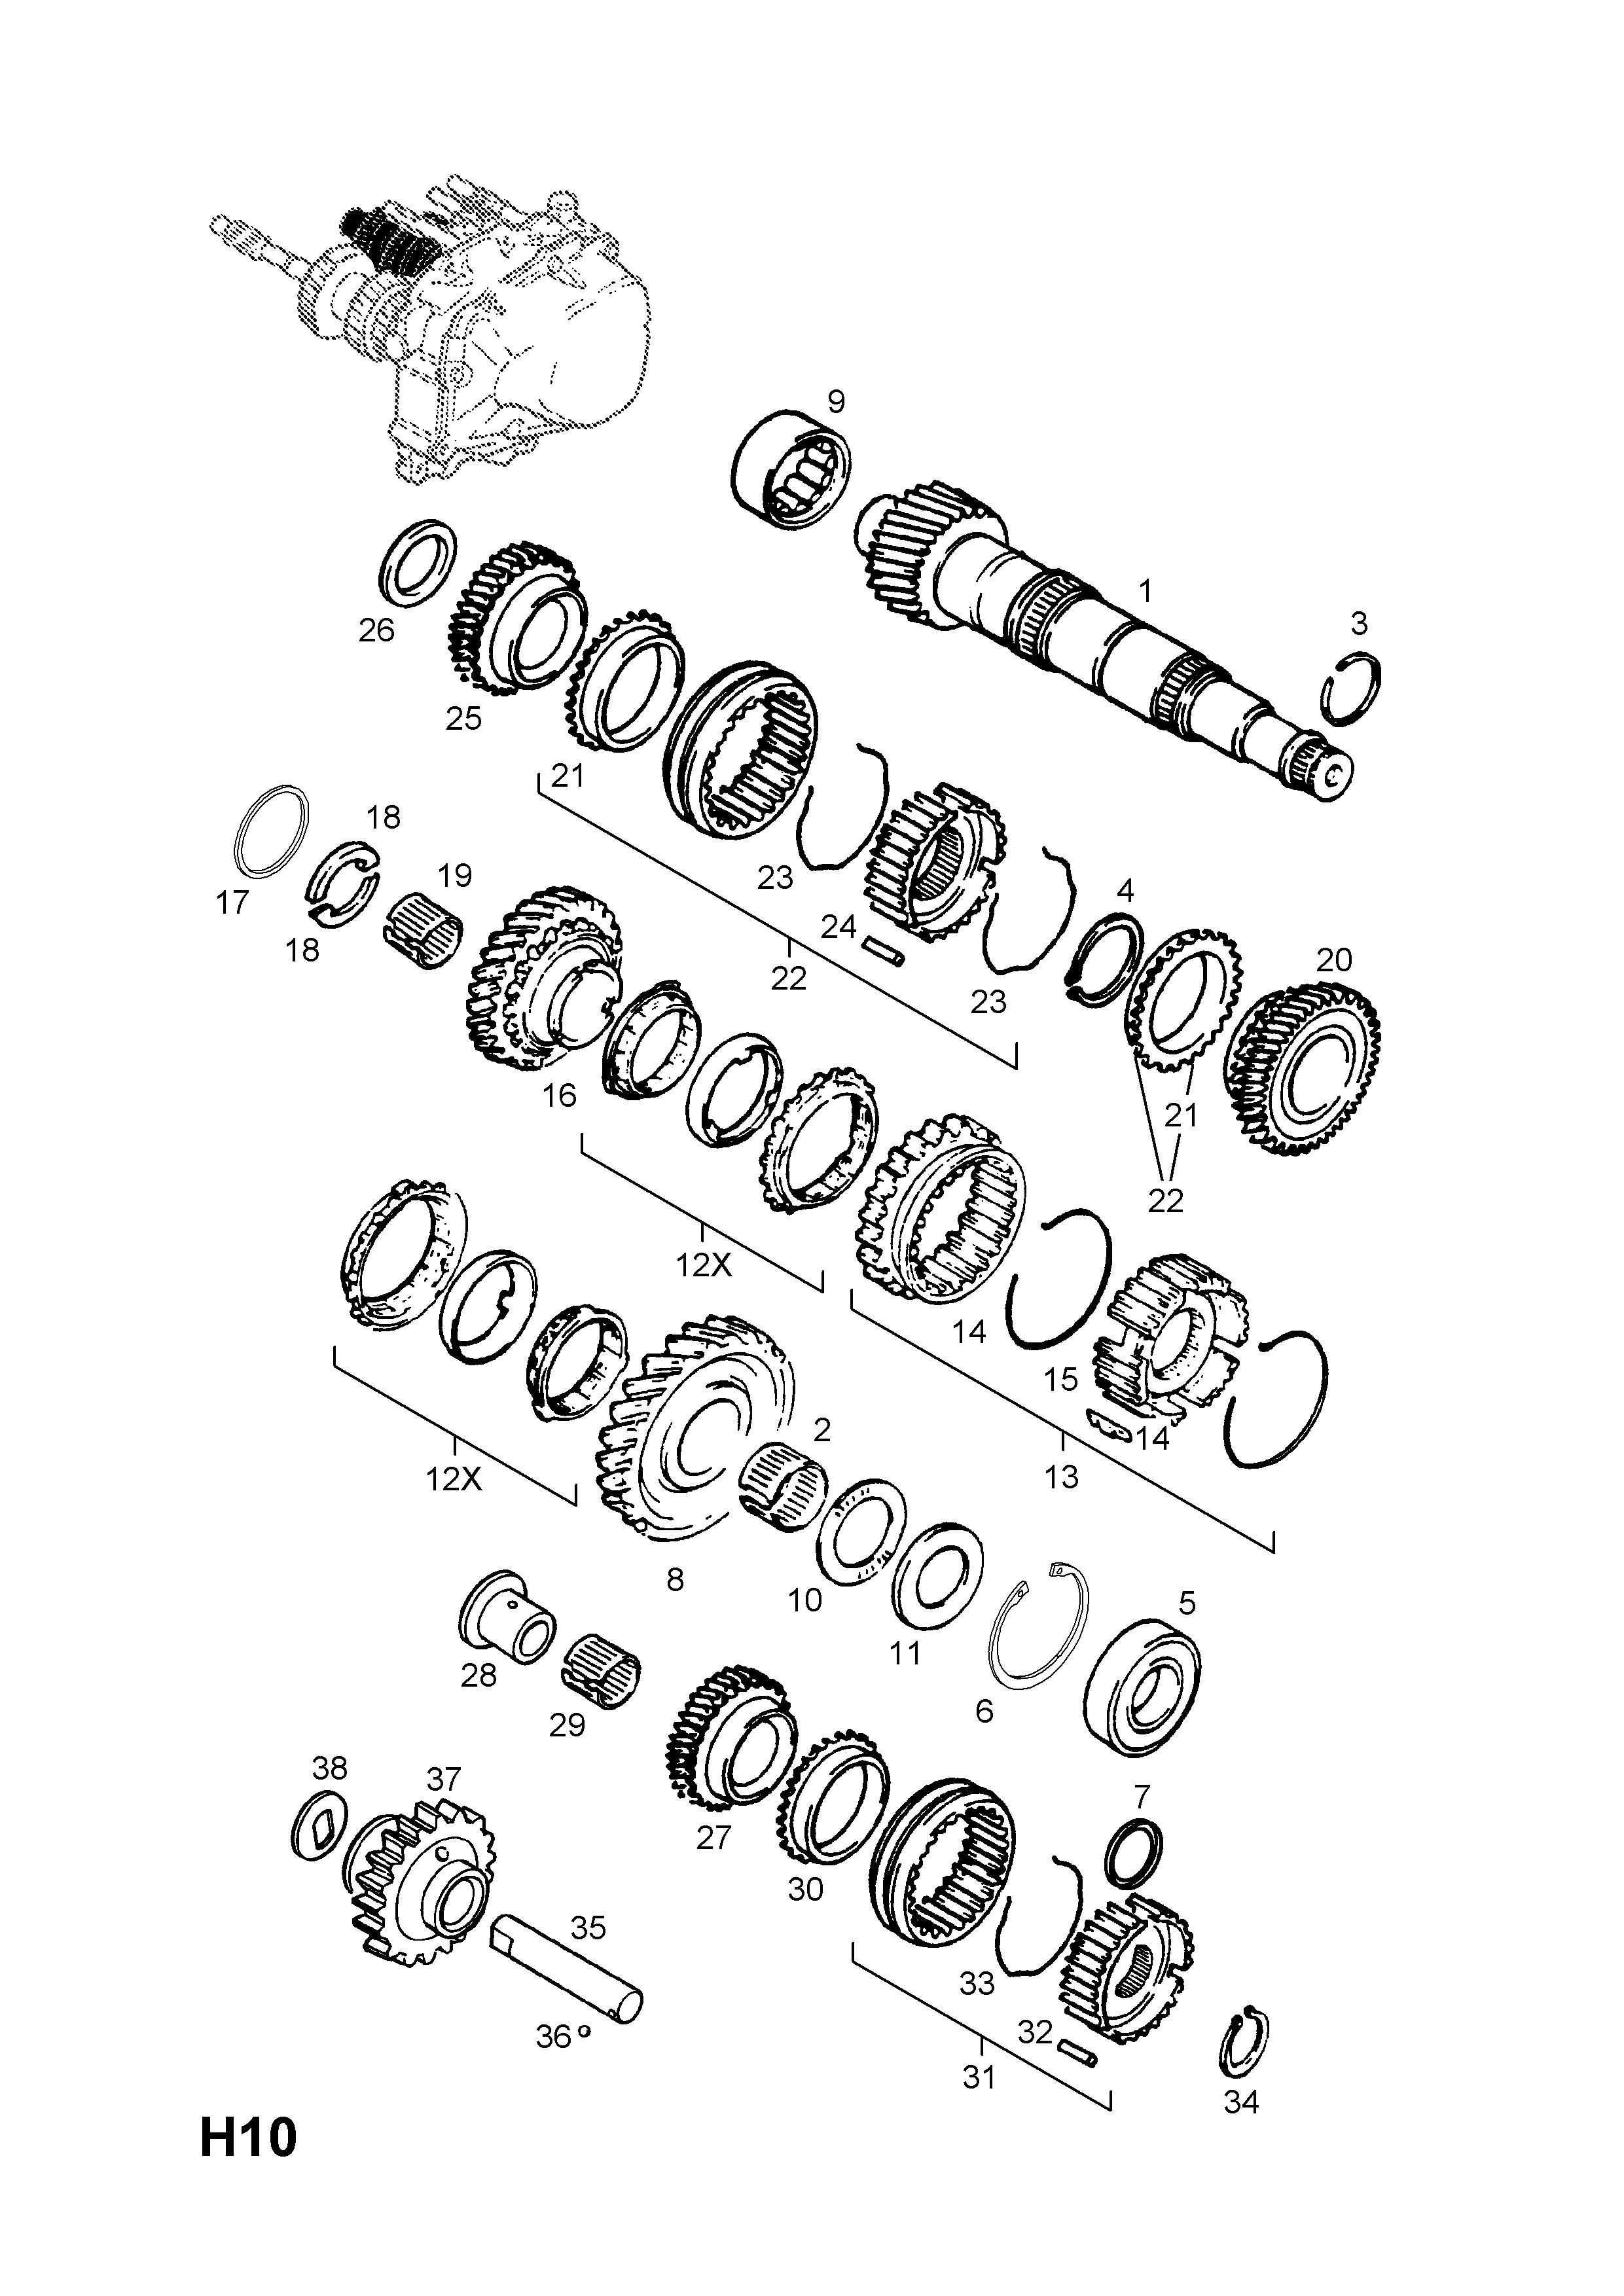 MAINSHAFT GEARS <small><i>[THIRD,FOURTH AND FIFTH GEARS]</i></small>